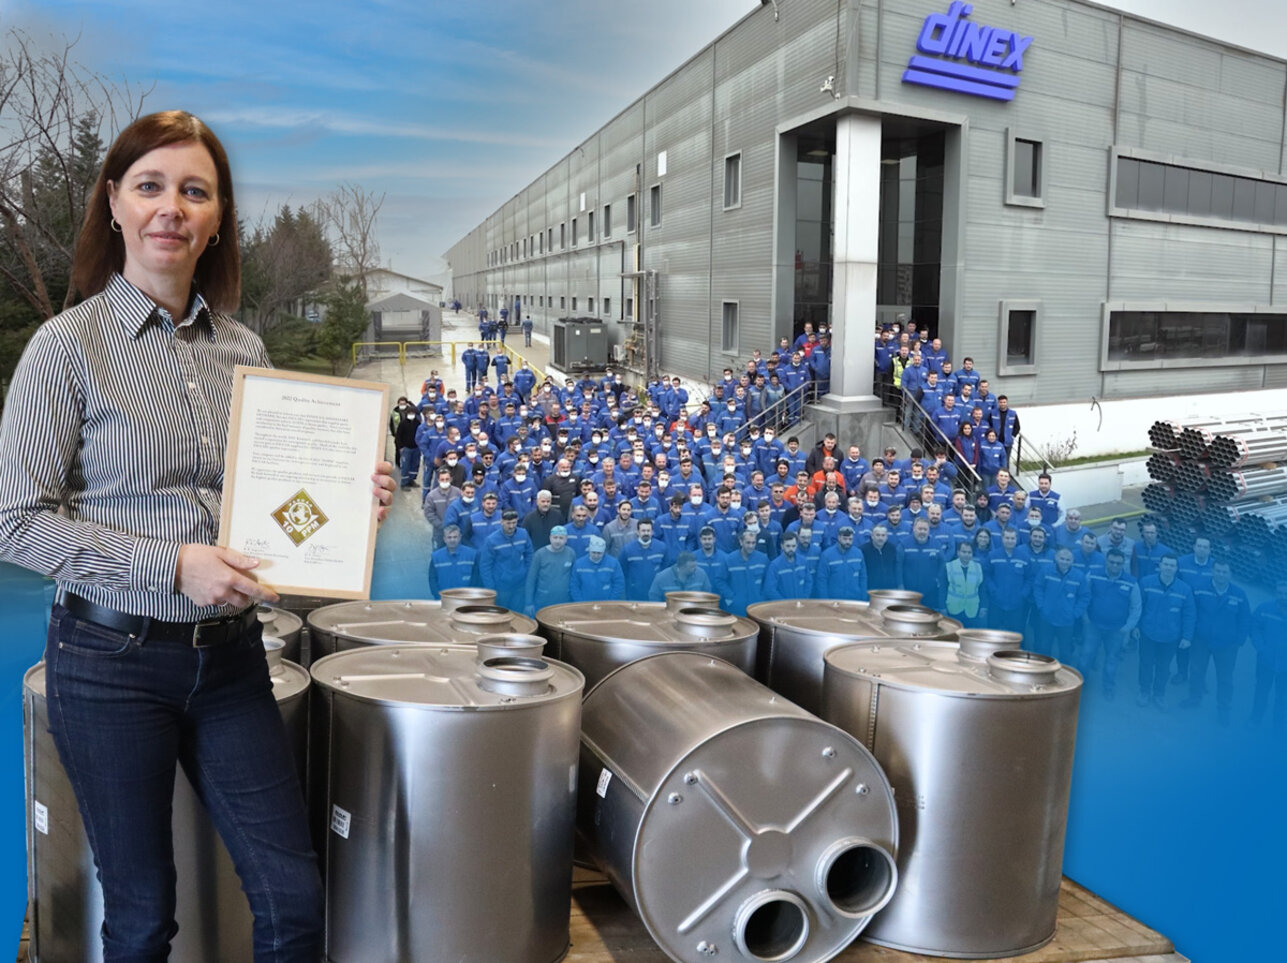  PACCAR honored Dinex with “2022 Quality Achievement” certificate.